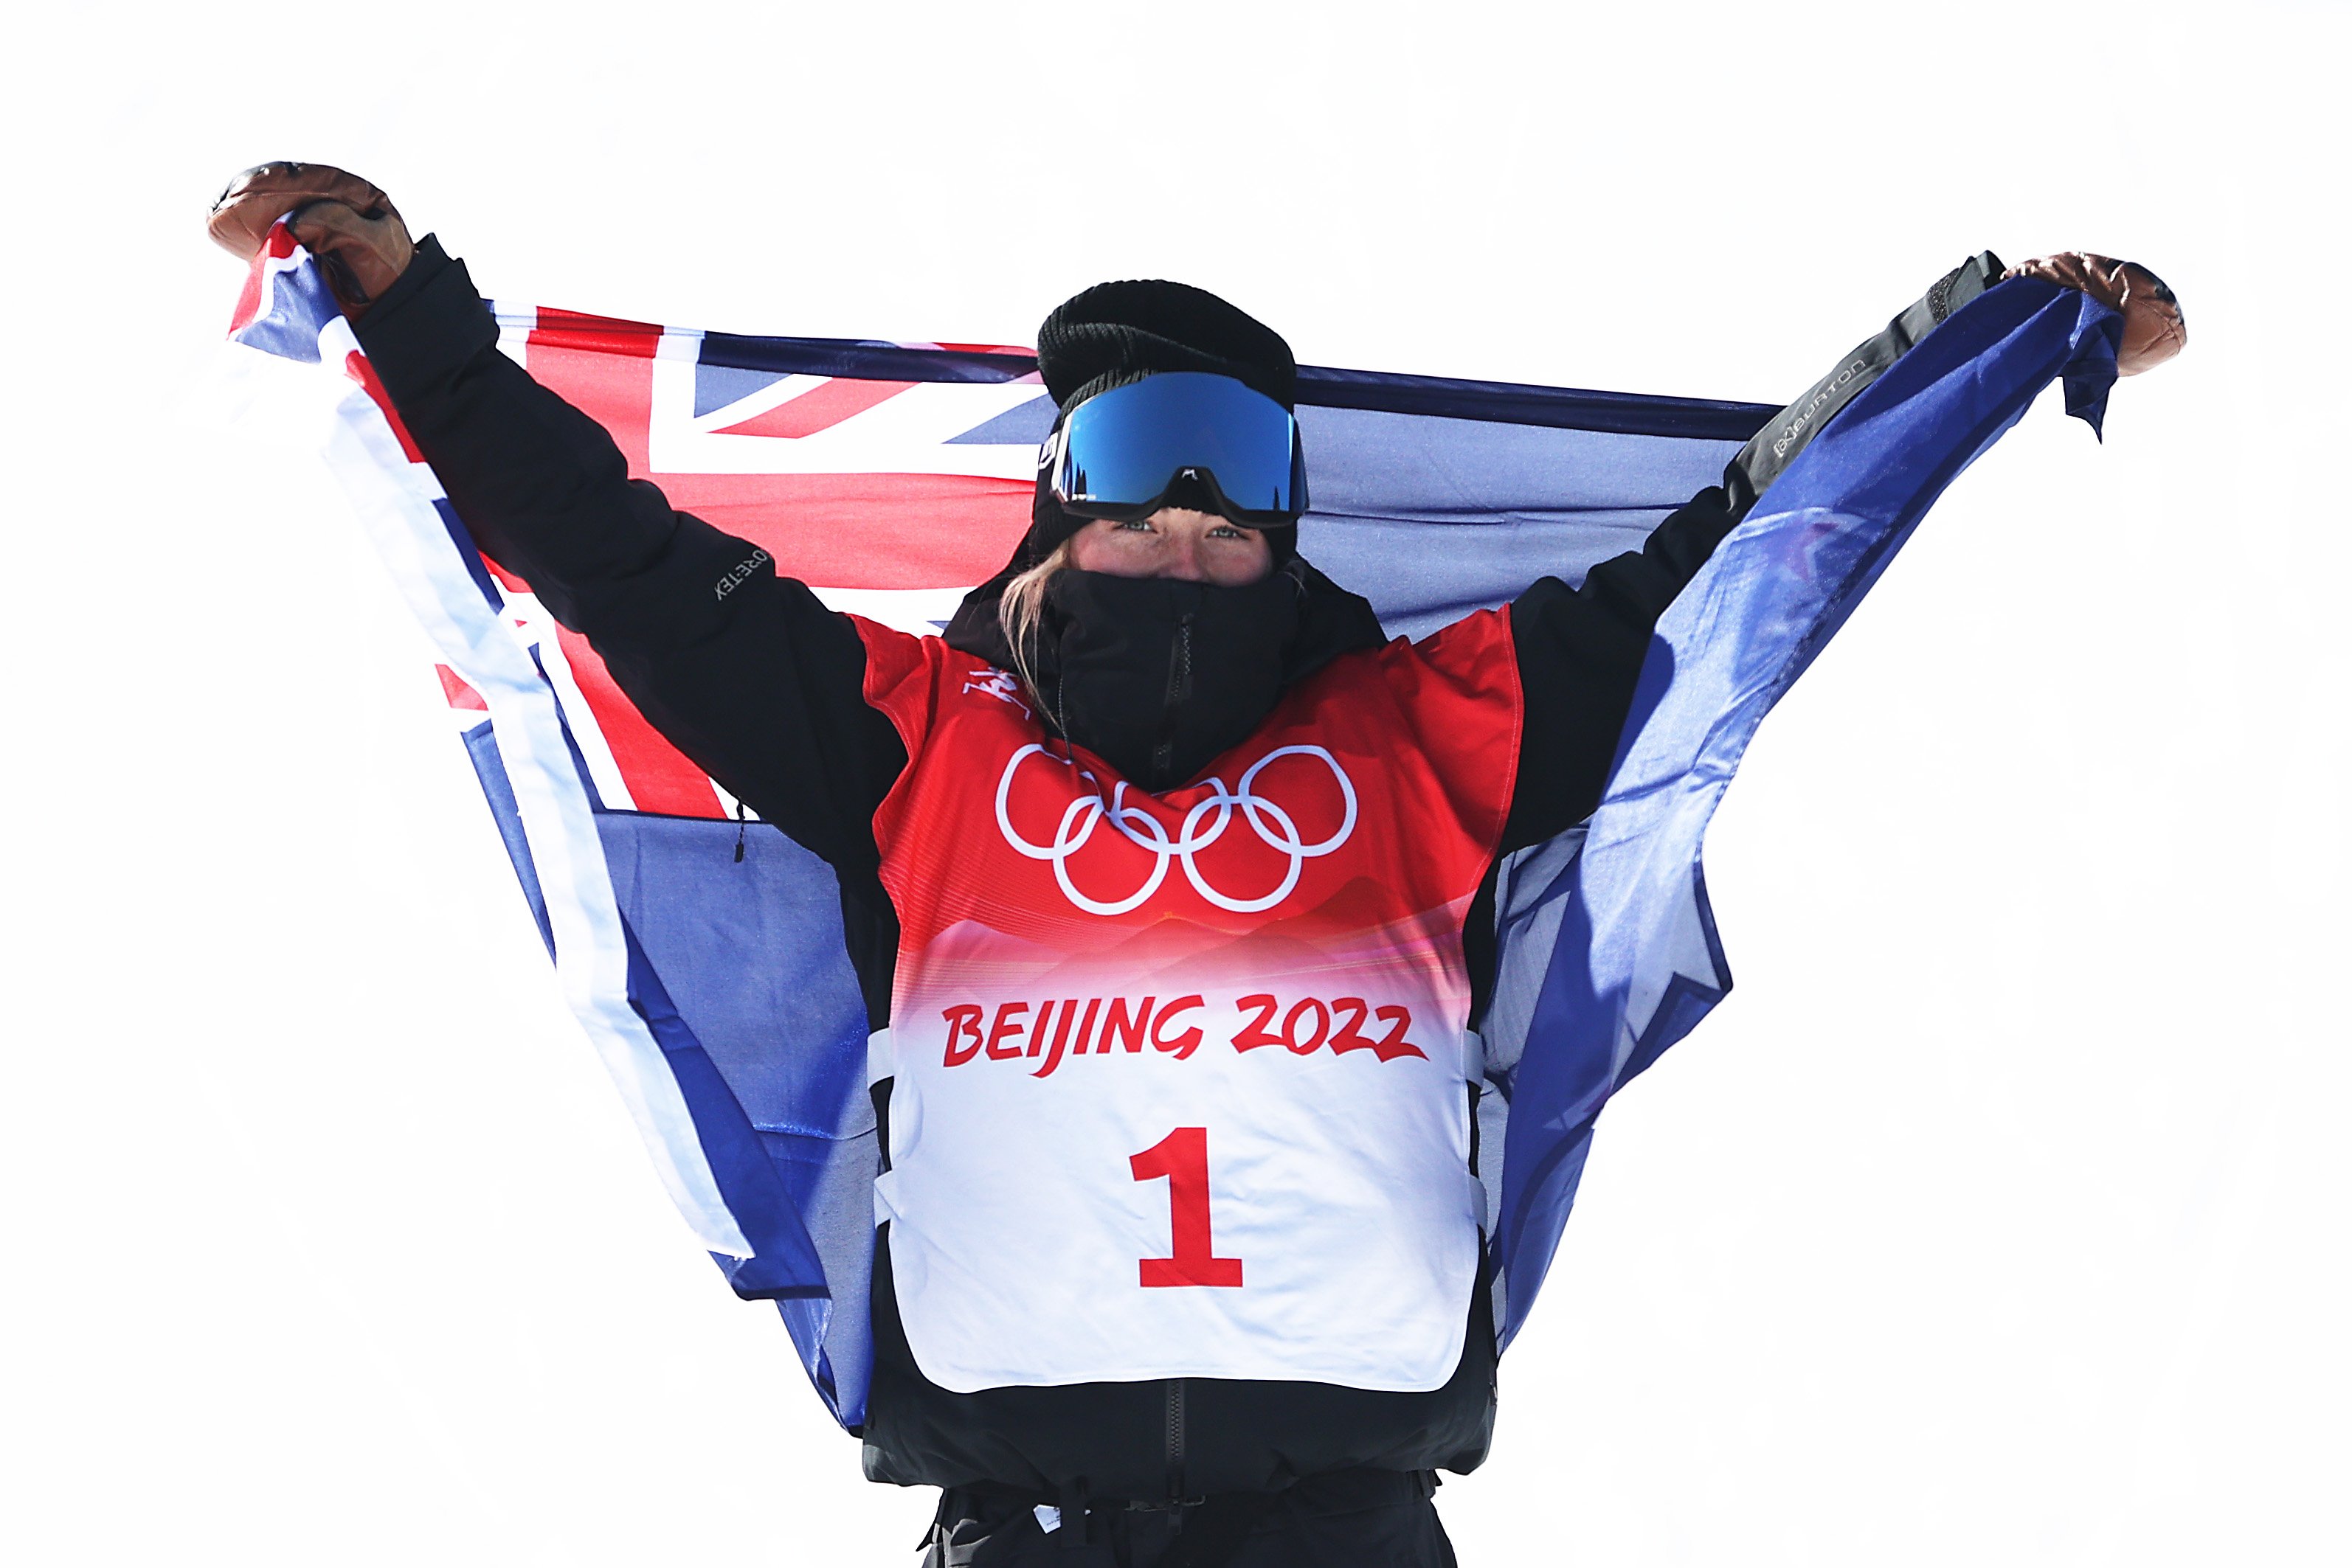 A gold medal in the slopestyle competition at the Beijing Winter Olympics was among Zoi Sadowski...